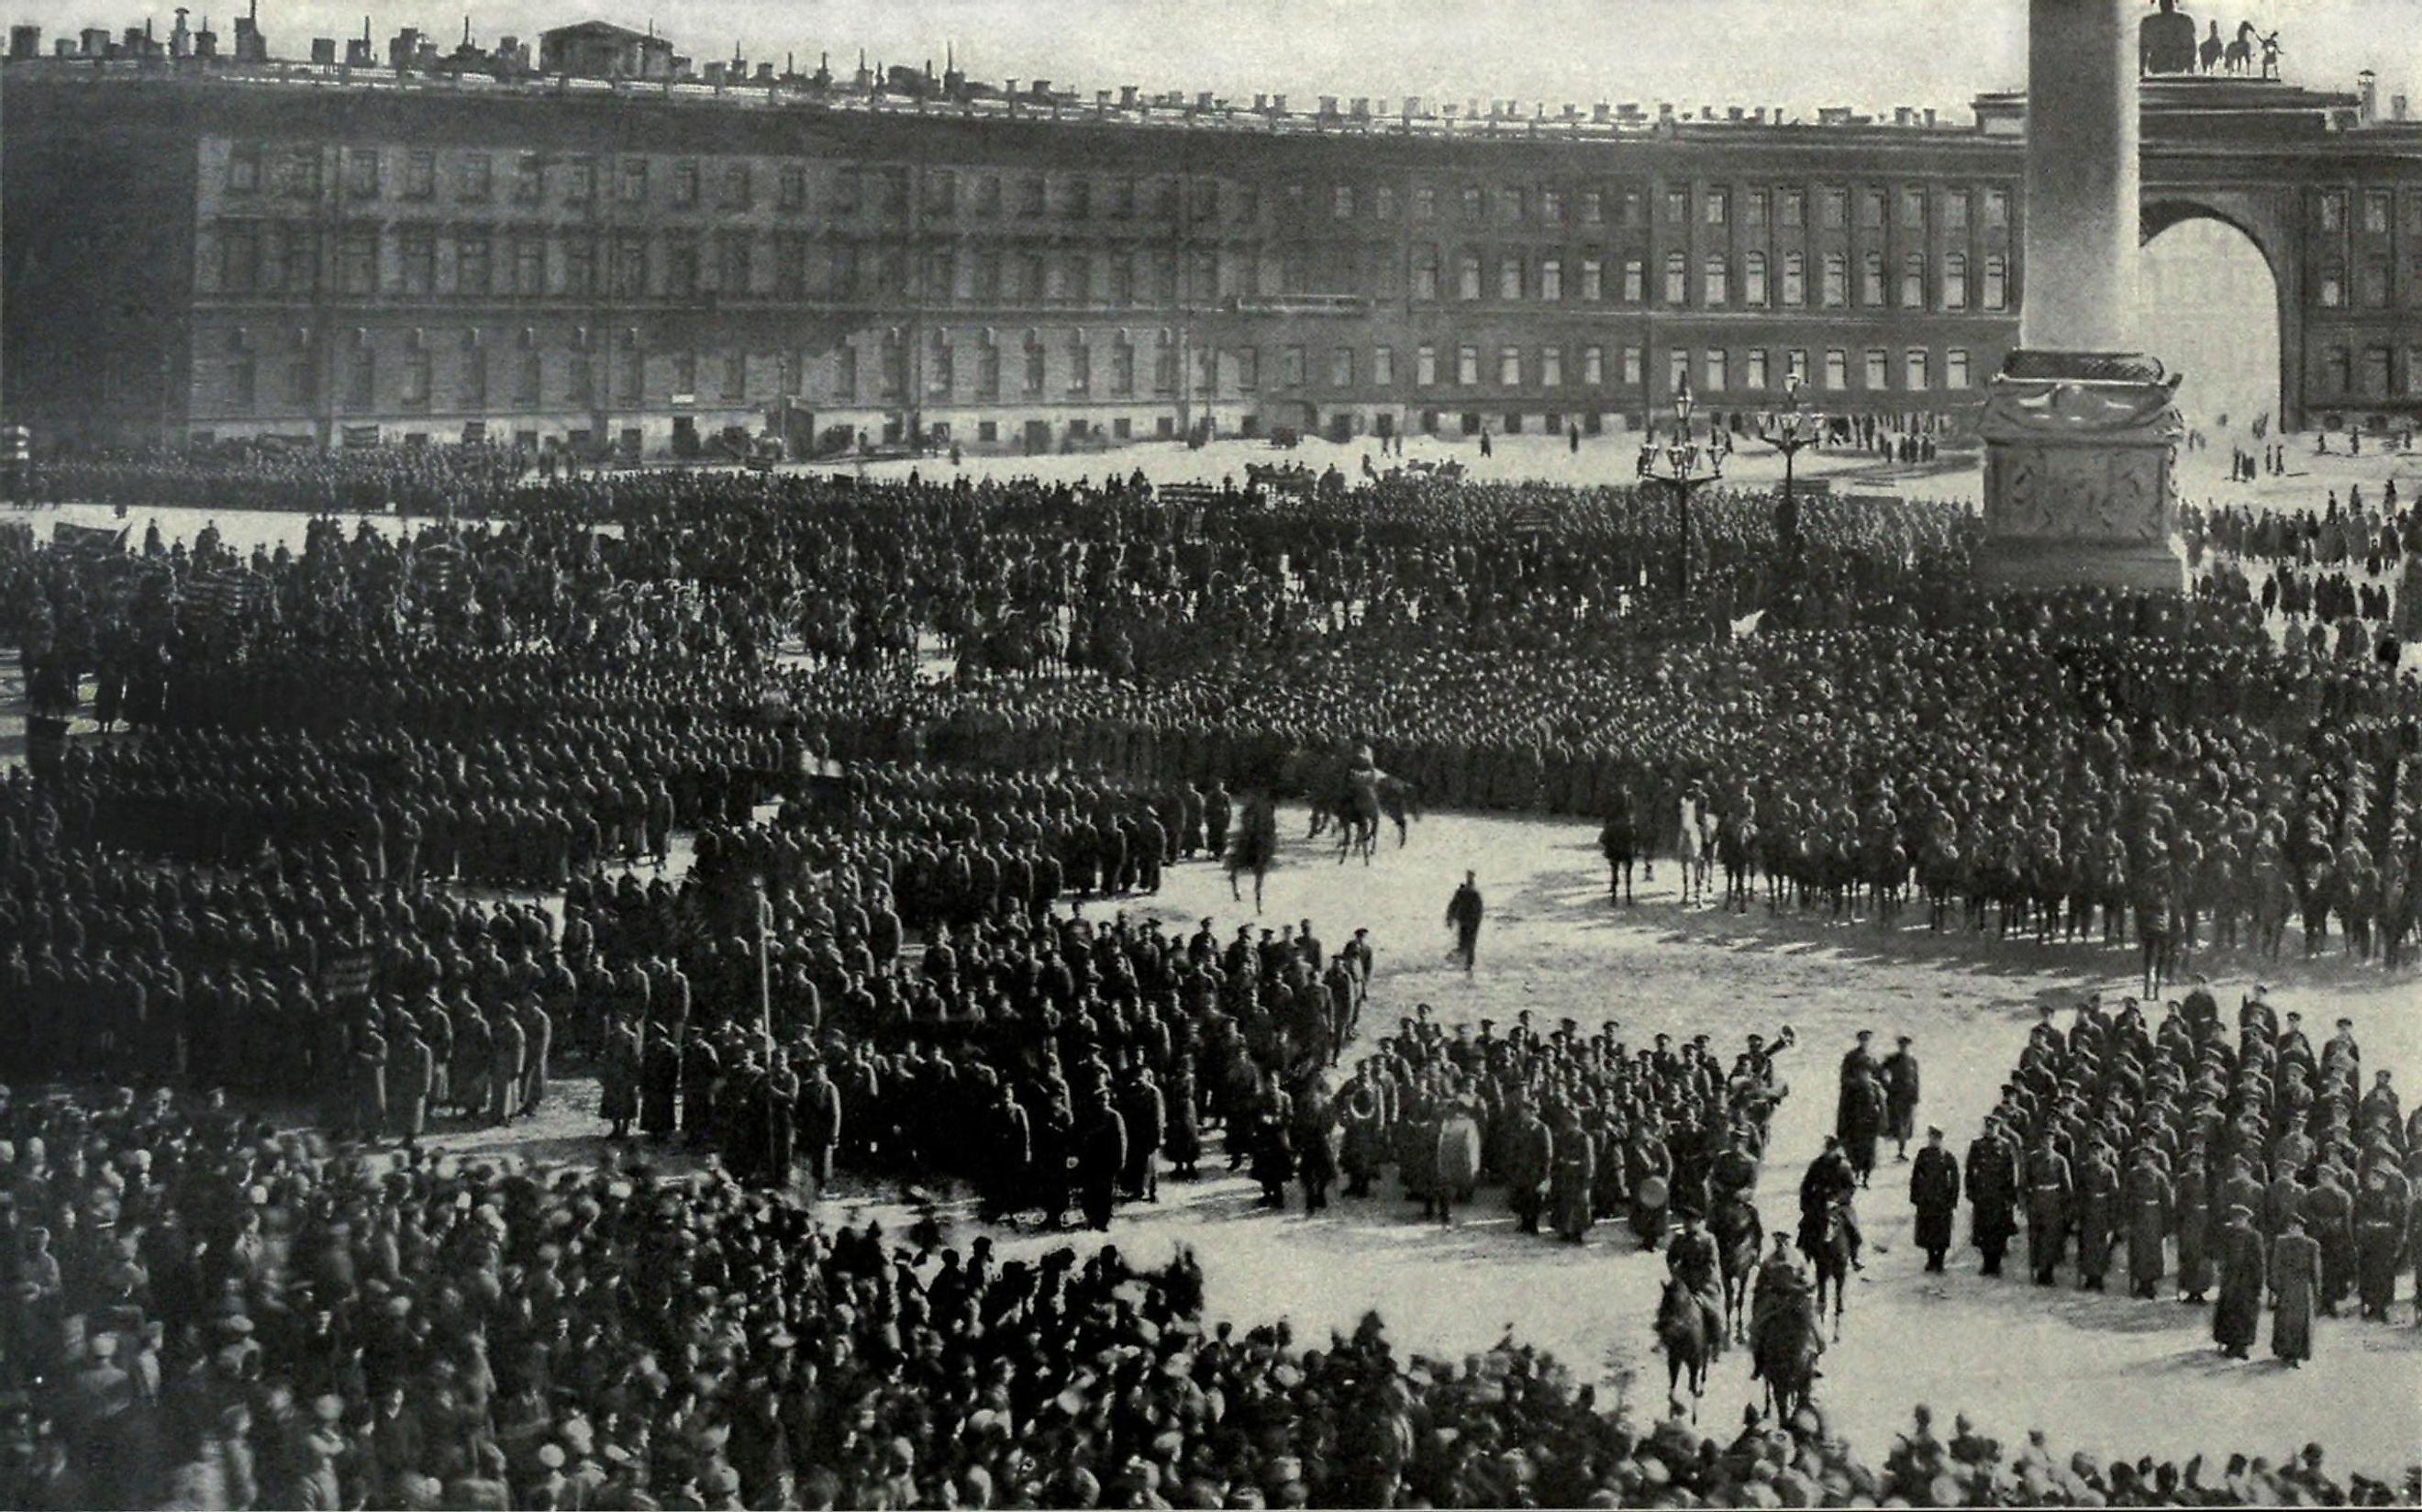 The Russian Army taking the oath of allegiance to the October Revolution.